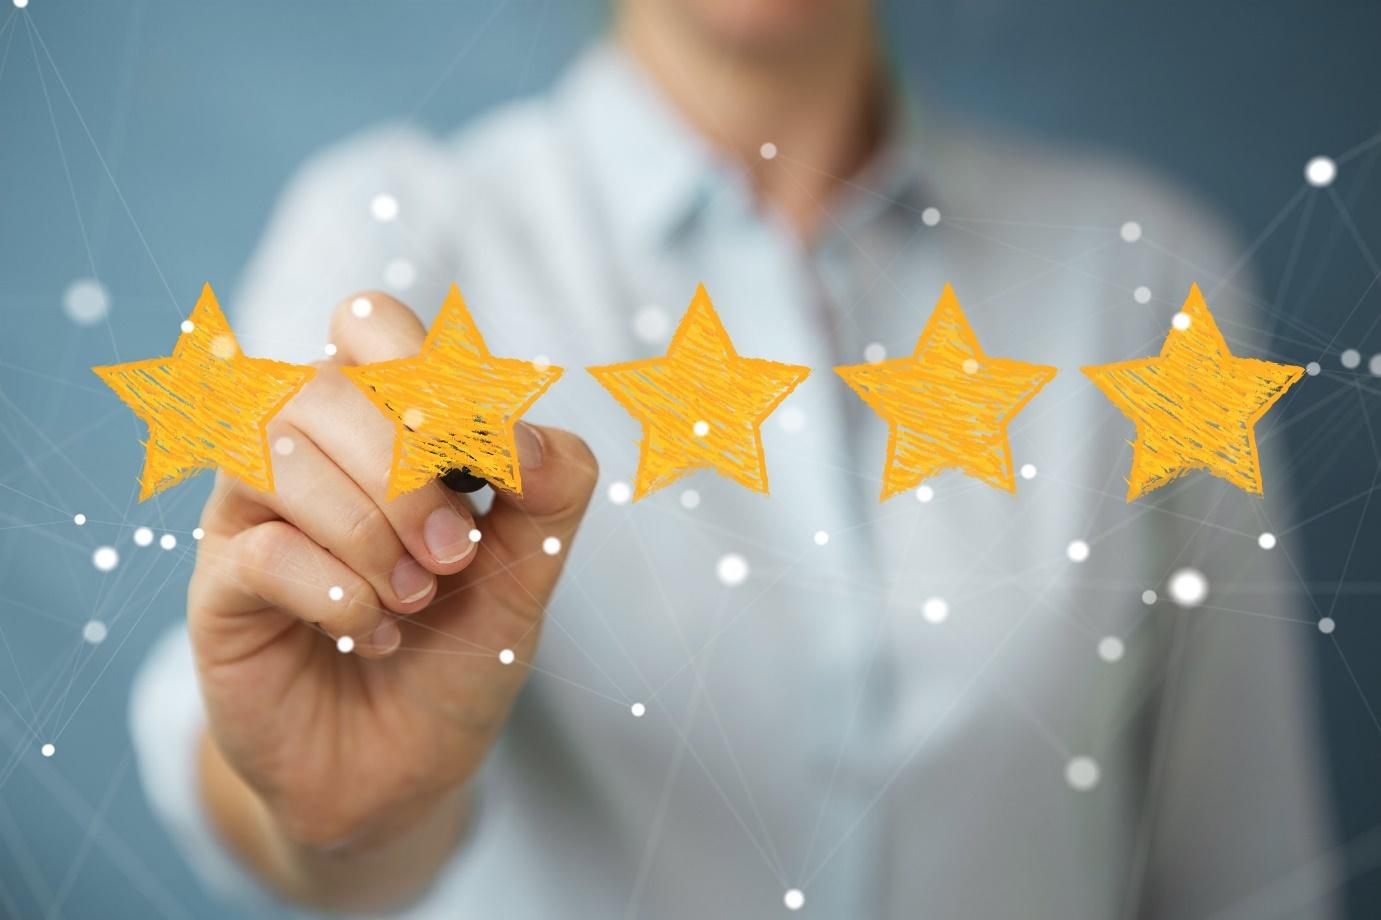 Stakeholders laud 'incremental improvement' to star ratings methodology but  call for further updates | Fierce Healthcare